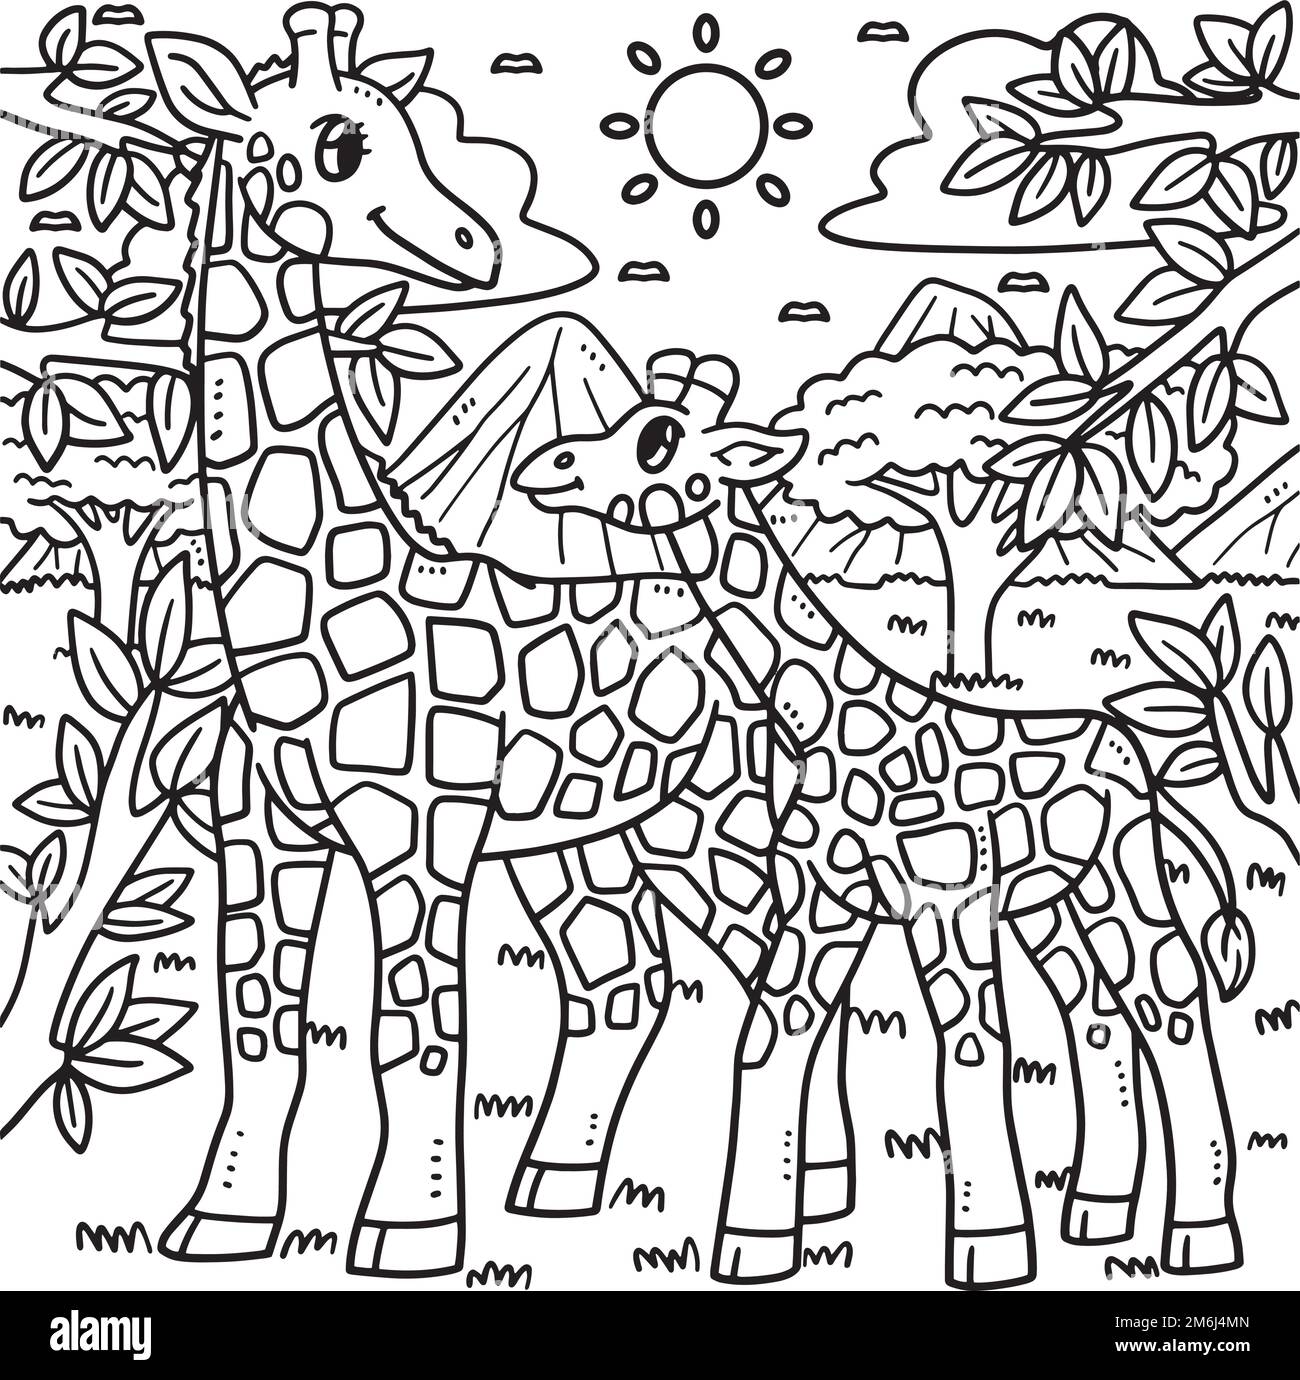 Mother Giraffe and Baby Giraffe Coloring Page  Stock Vector